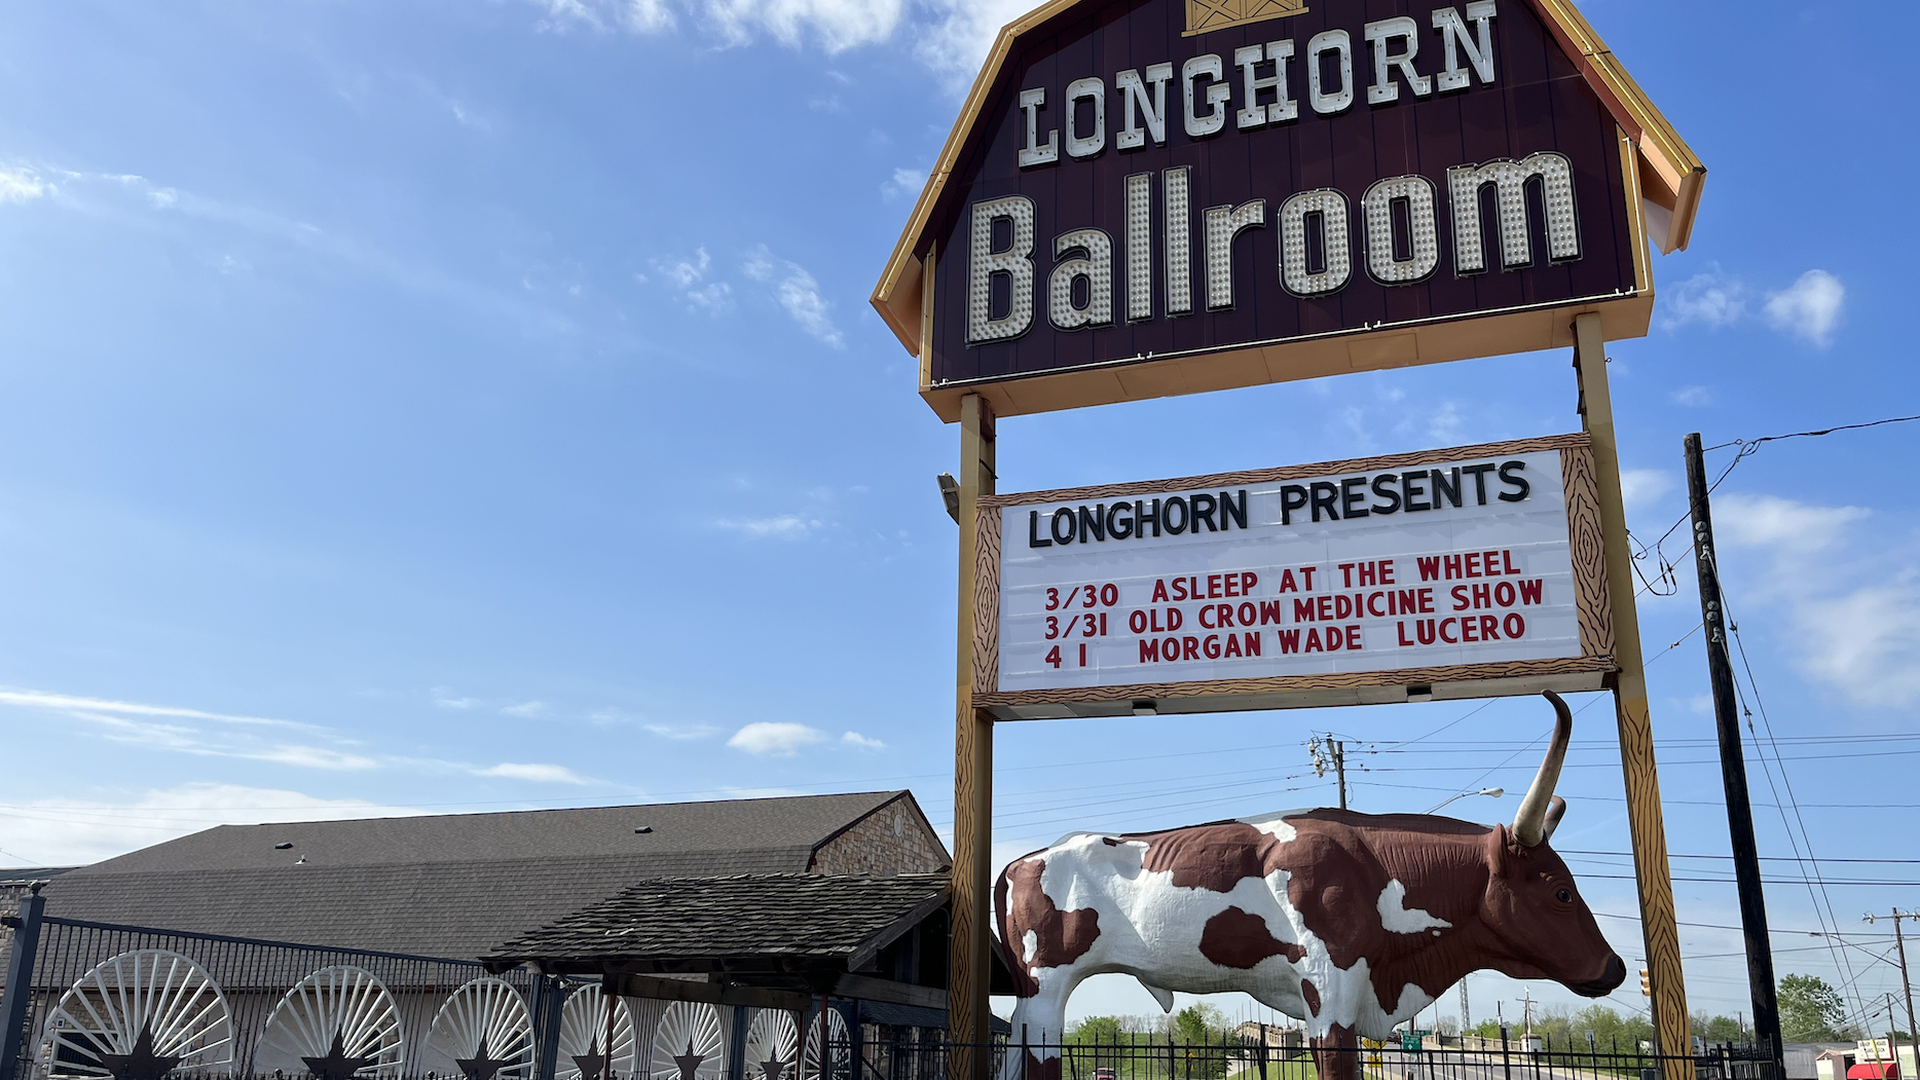 A photo of the Longhorn Ballroom in Dallas